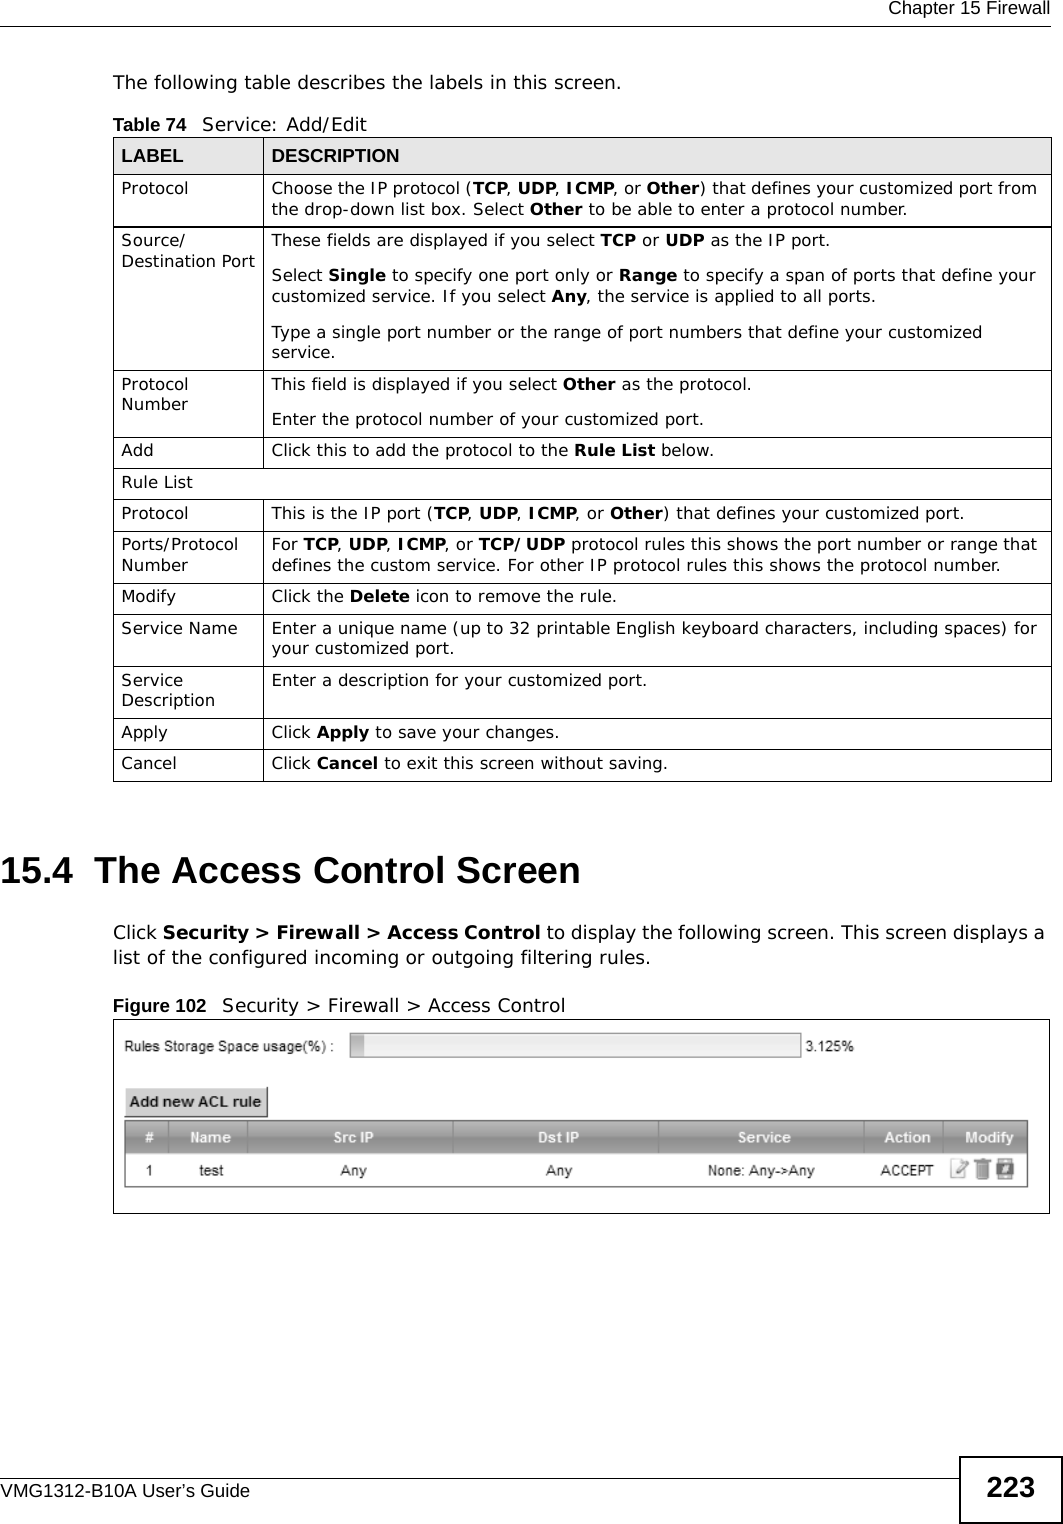  Chapter 15 FirewallVMG1312-B10A User’s Guide 223The following table describes the labels in this screen.15.4  The Access Control ScreenClick Security &gt; Firewall &gt; Access Control to display the following screen. This screen displays a list of the configured incoming or outgoing filtering rules. Figure 102   Security &gt; Firewall &gt; Access Control Table 74   Service: Add/EditLABEL DESCRIPTIONProtocol Choose the IP protocol (TCP, UDP, ICMP, or Other) that defines your customized port from the drop-down list box. Select Other to be able to enter a protocol number.Source/Destination Port These fields are displayed if you select TCP or UDP as the IP port. Select Single to specify one port only or Range to specify a span of ports that define your customized service. If you select Any, the service is applied to all ports.Type a single port number or the range of port numbers that define your customized service.Protocol Number This field is displayed if you select Other as the protocol.Enter the protocol number of your customized port. Add Click this to add the protocol to the Rule List below.Rule ListProtocol This is the IP port (TCP, UDP, ICMP, or Other) that defines your customized port.Ports/Protocol Number For TCP, UDP, ICMP, or TCP/UDP protocol rules this shows the port number or range that defines the custom service. For other IP protocol rules this shows the protocol number. Modify Click the Delete icon to remove the rule.Service Name Enter a unique name (up to 32 printable English keyboard characters, including spaces) for your customized port. Service Description Enter a description for your customized port.Apply Click Apply to save your changes.Cancel Click Cancel to exit this screen without saving.